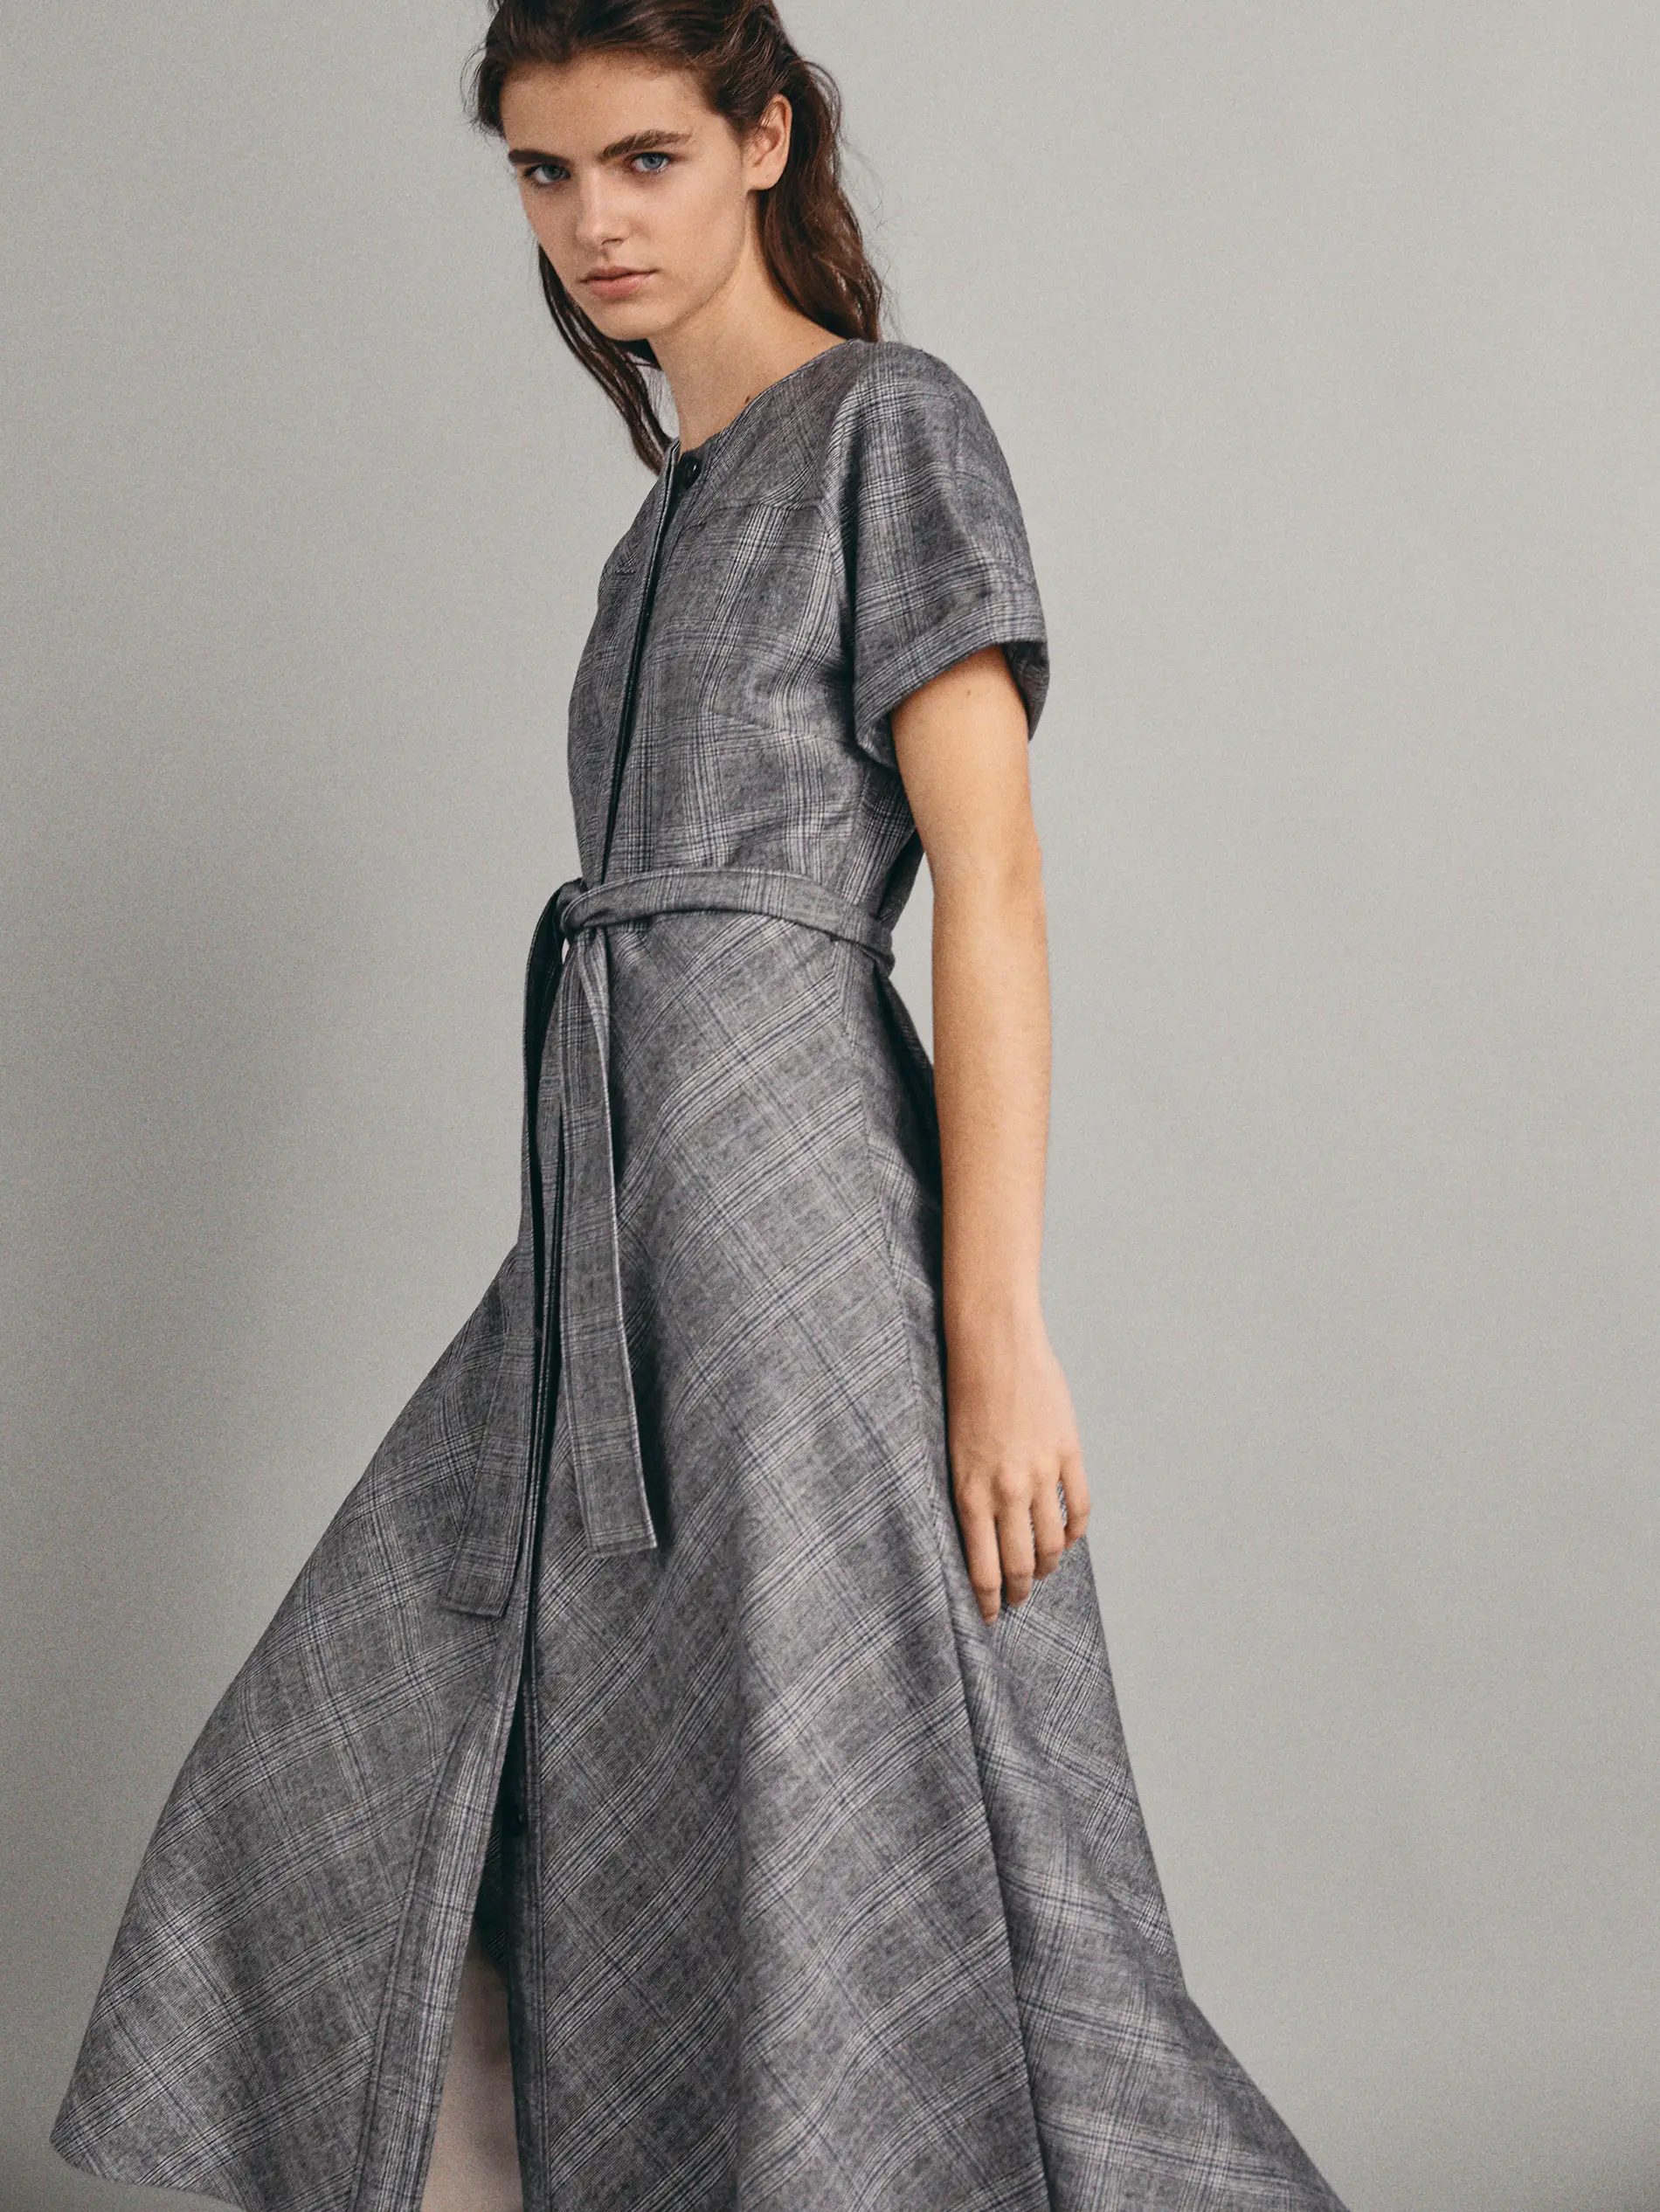 Queen Letizia wore Massimo Dutti Wool Check Dress With Belt